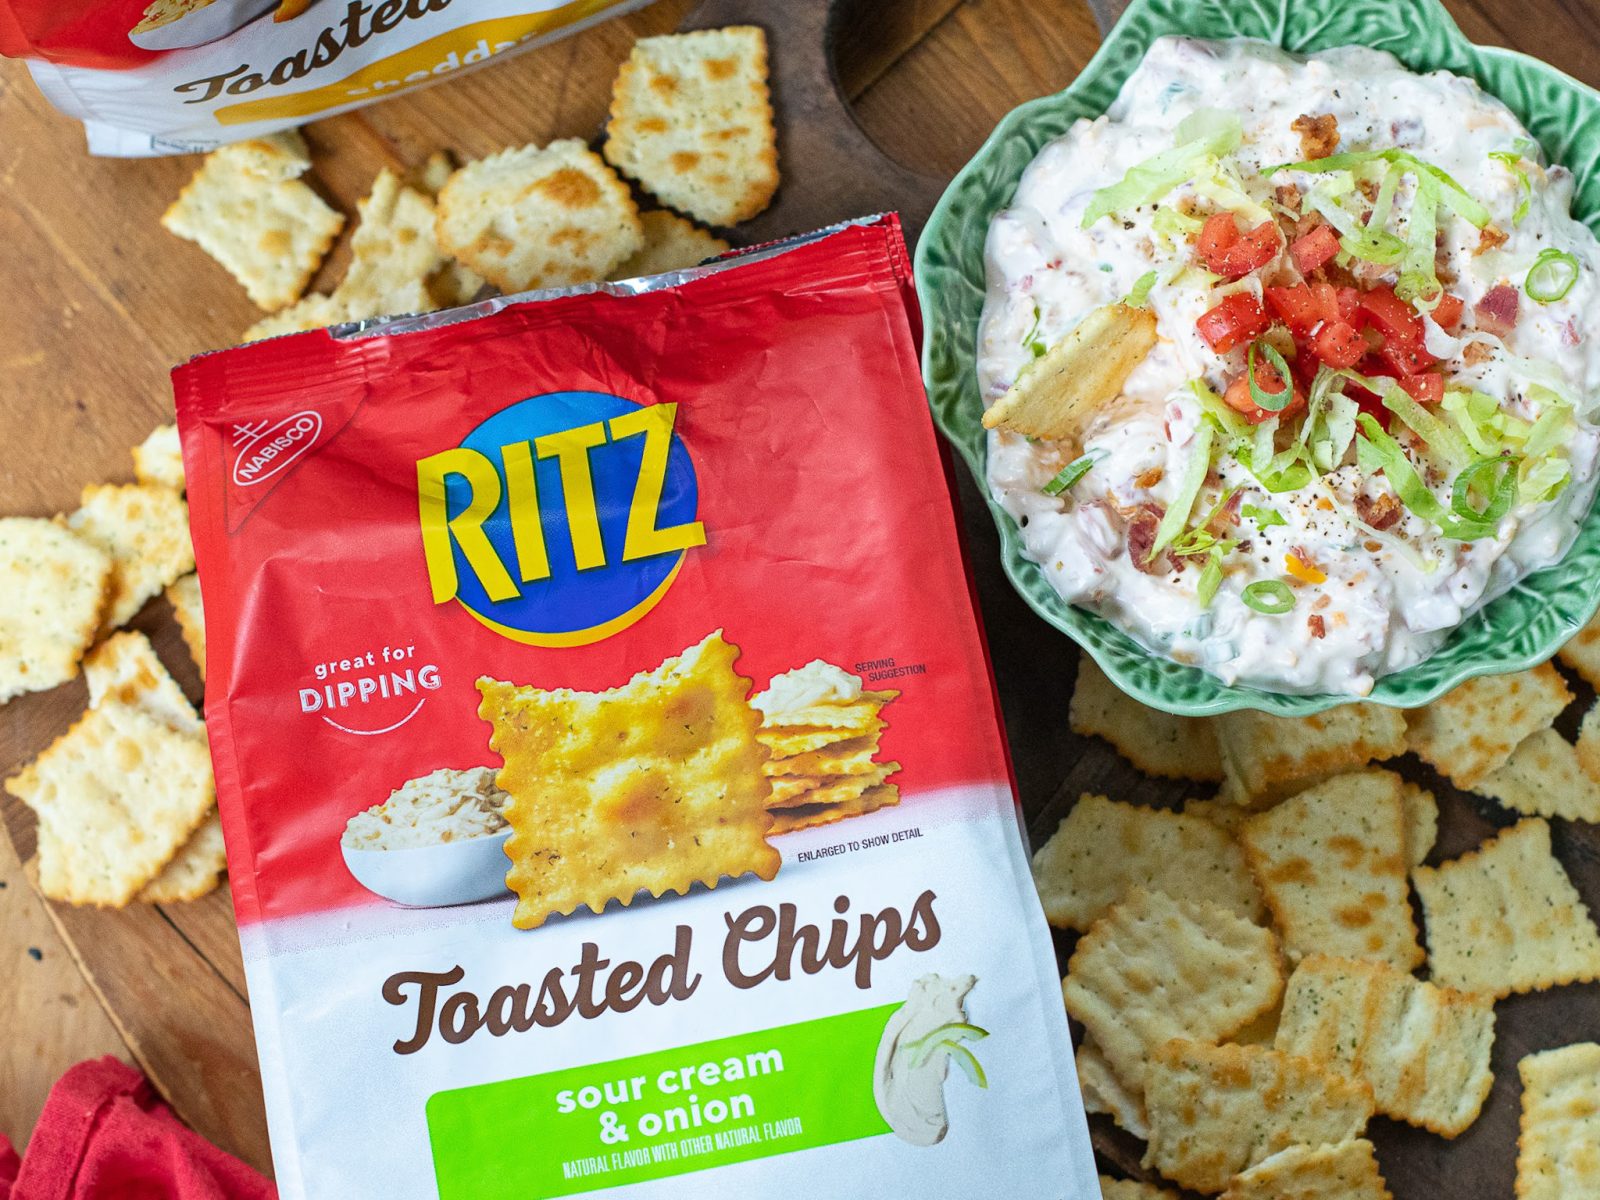 Ritz Cheese Crispers Or Toasted Chips As Low As $1.24 at Kroger